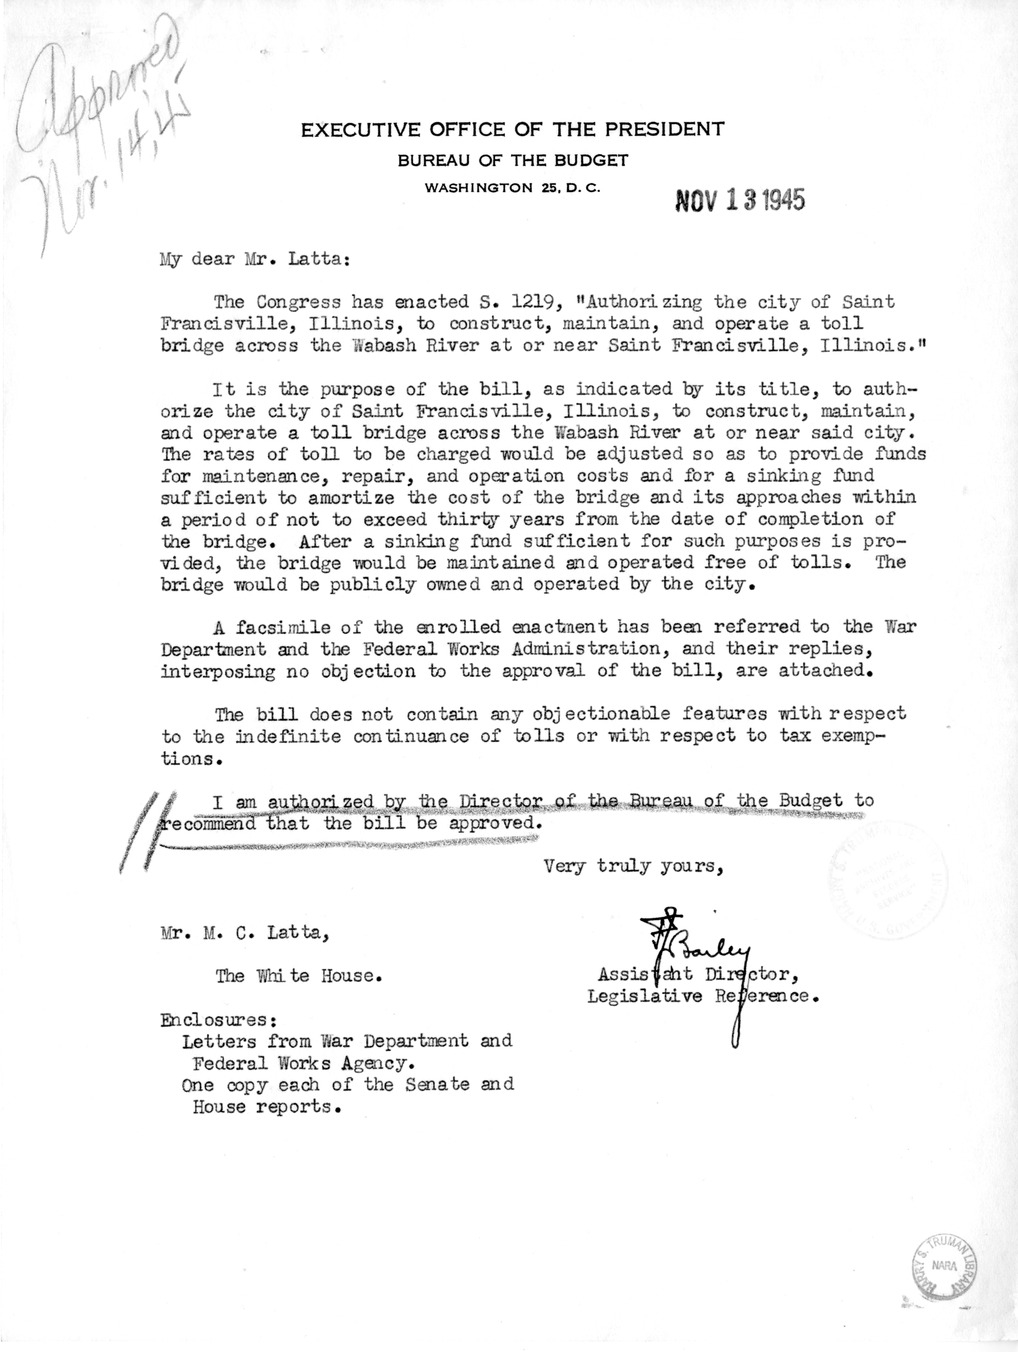 Memorandum from Frederick J. Bailey to M. C. Latta, S. 1219, Authorizing the City of Saint Francisville, Illinois, to Construct, Maintain, and Operate a Toll Bridge Across the Wabash River at or Near Saint Francisville, Illinois, with Attachments